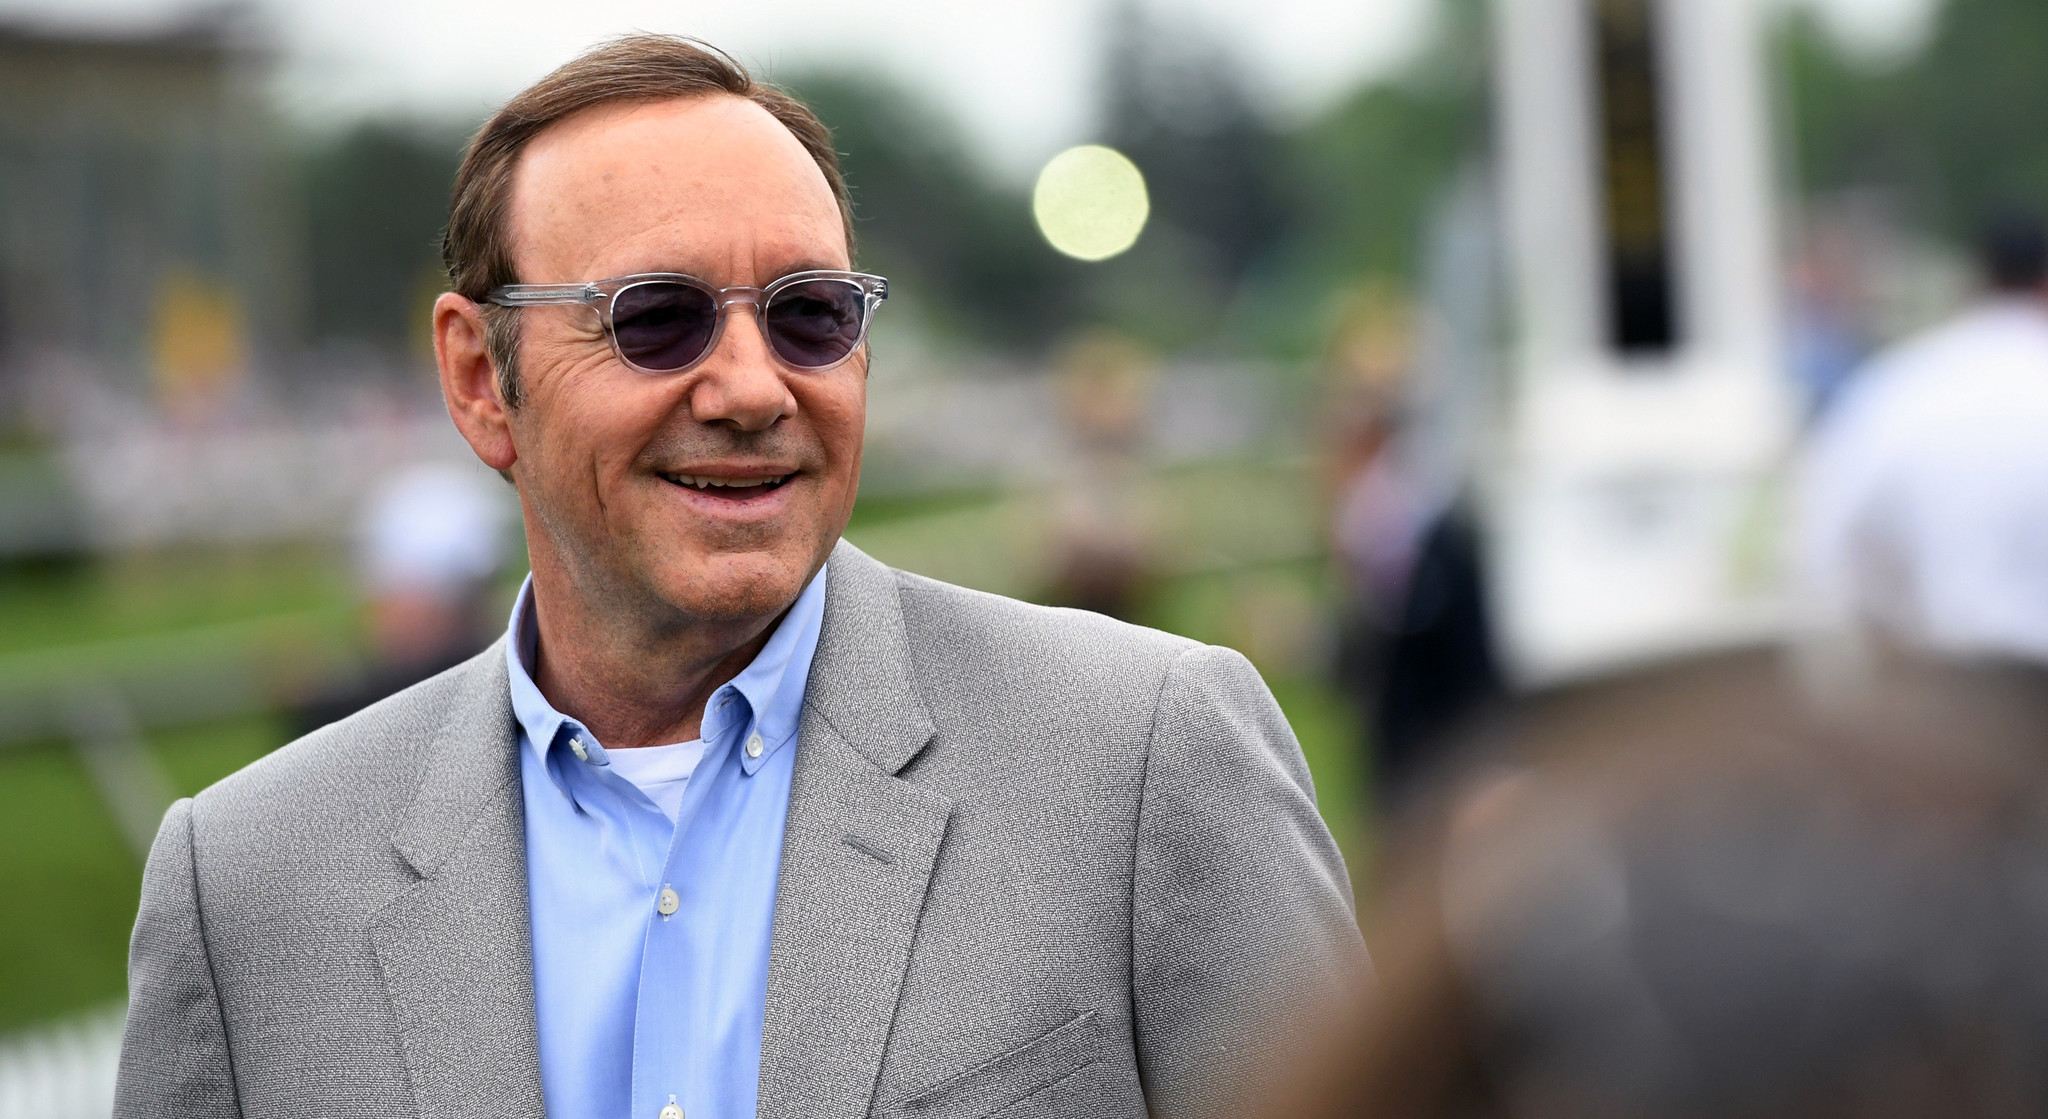 Kevin Spacey’s Lawyers Enter Not Guilty Plea On Charges Of Groping A Young Boy At Nantucket Bar